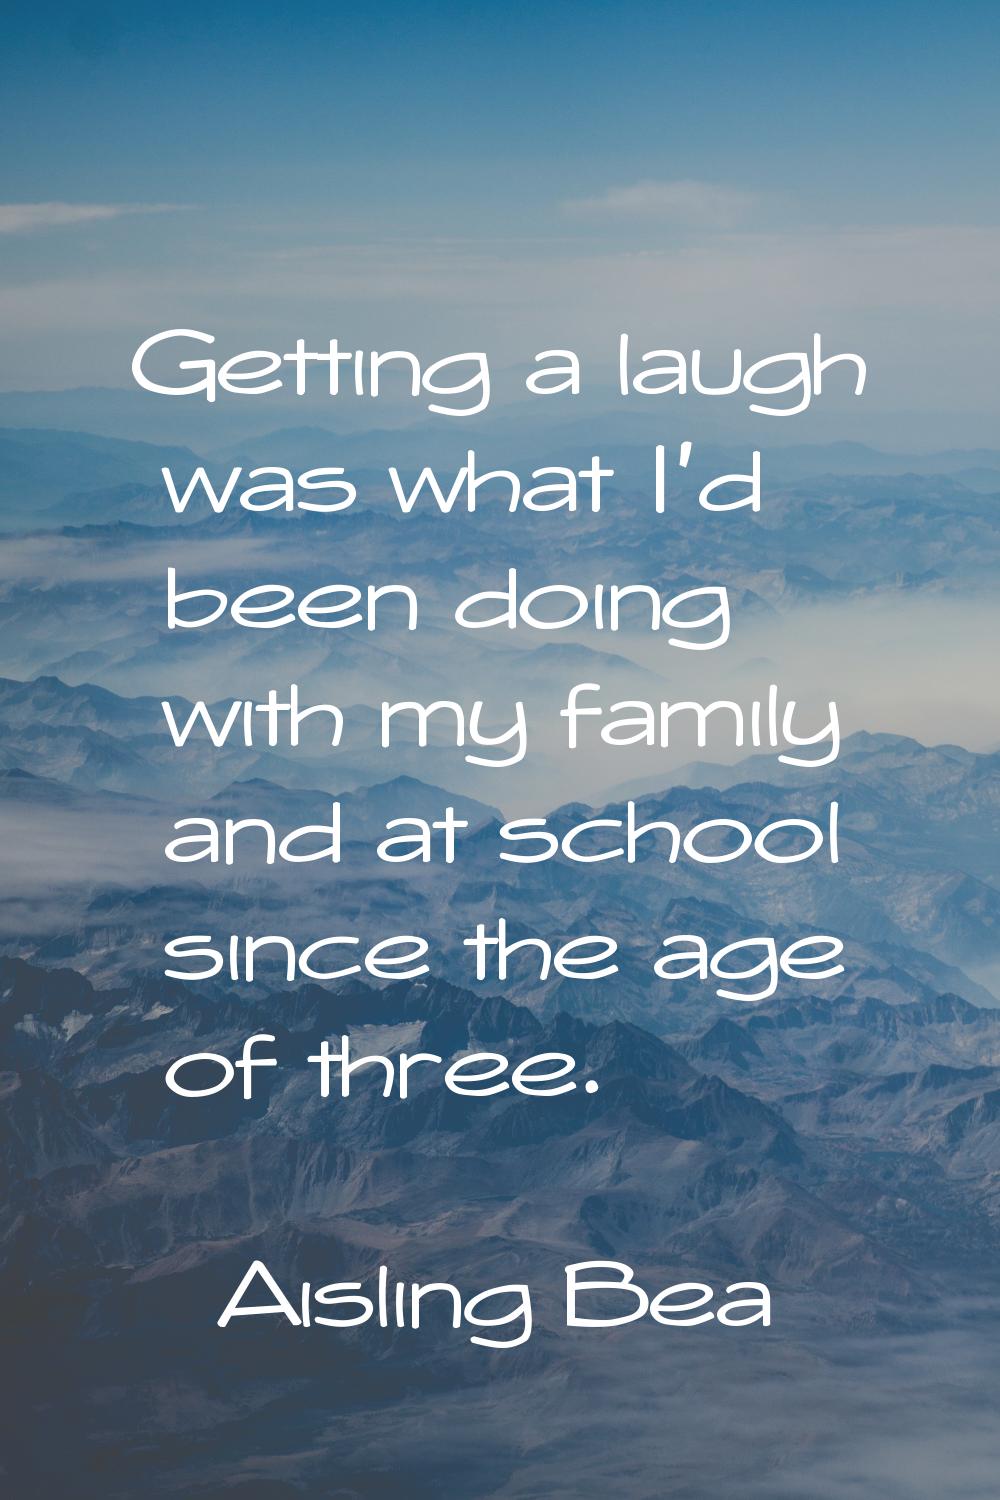 Getting a laugh was what I'd been doing with my family and at school since the age of three.